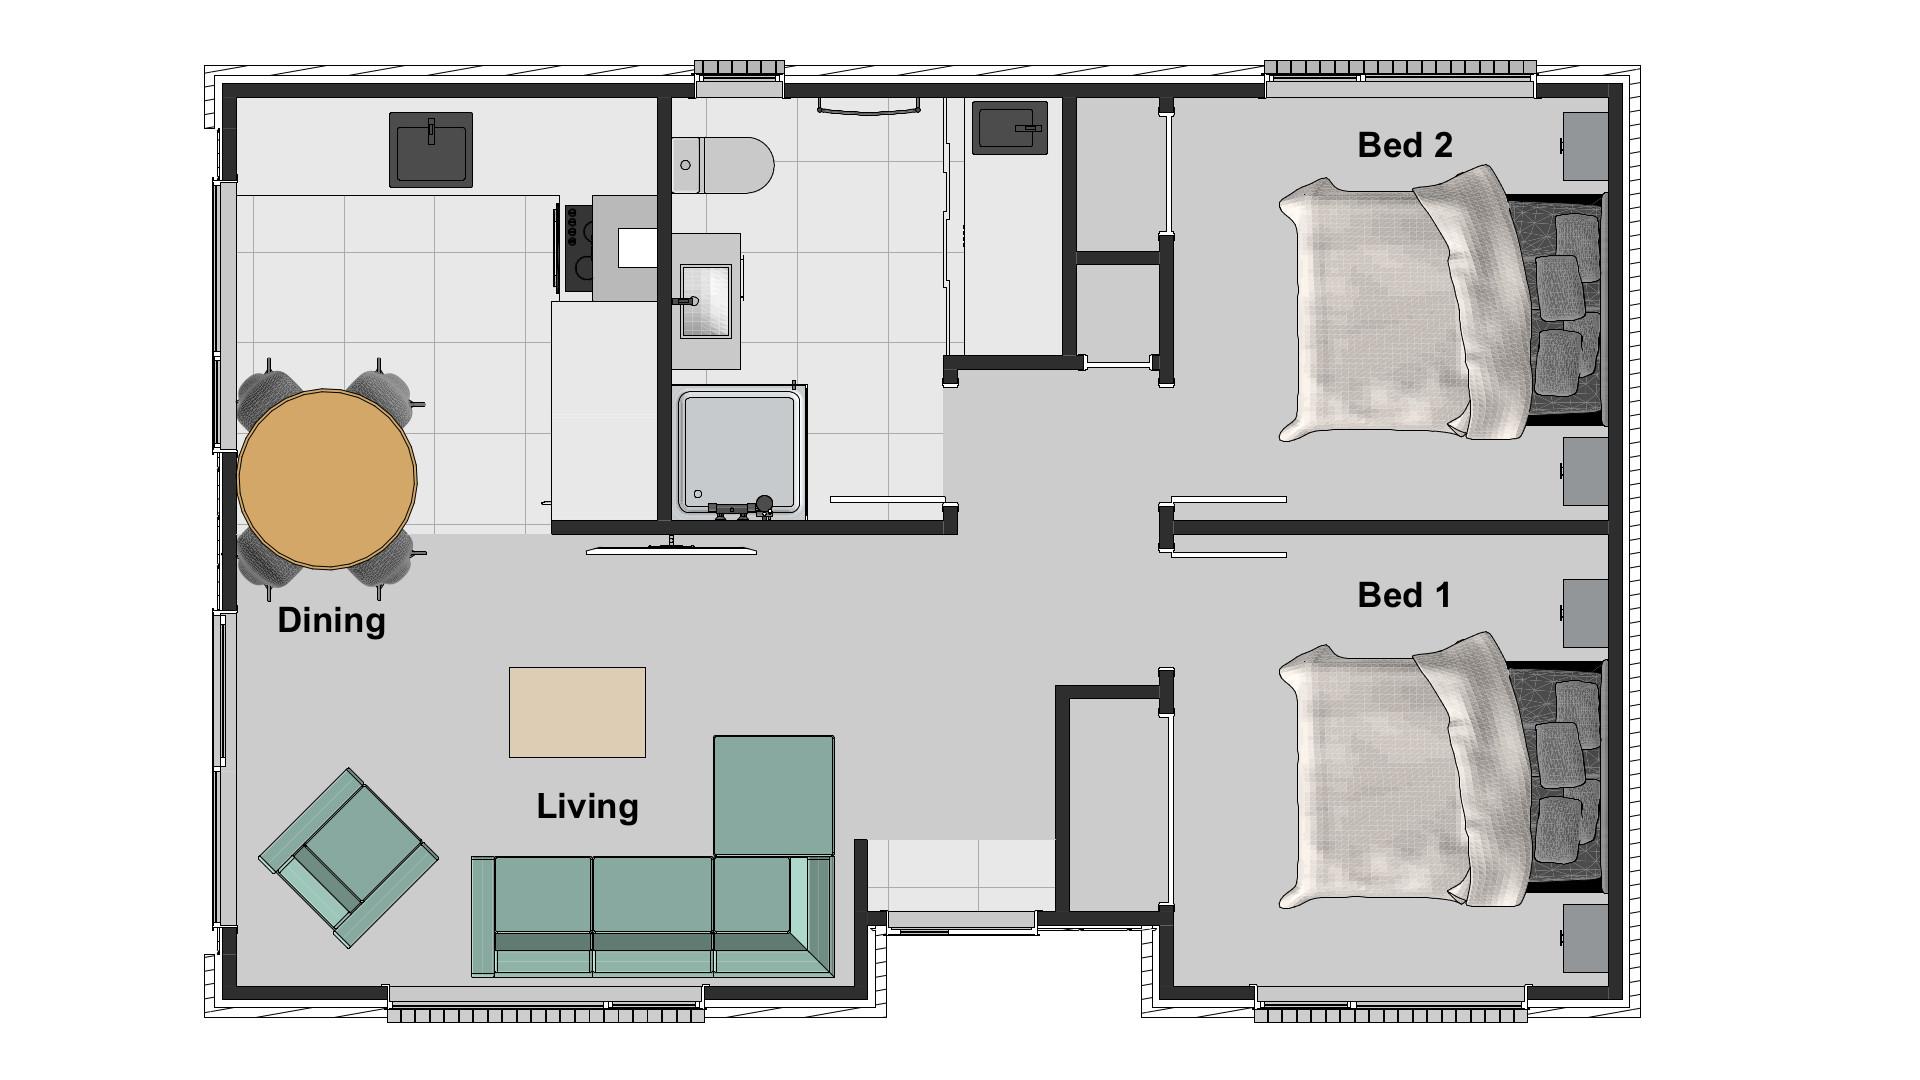 Two Bedroom Rental or First Home image, index 1